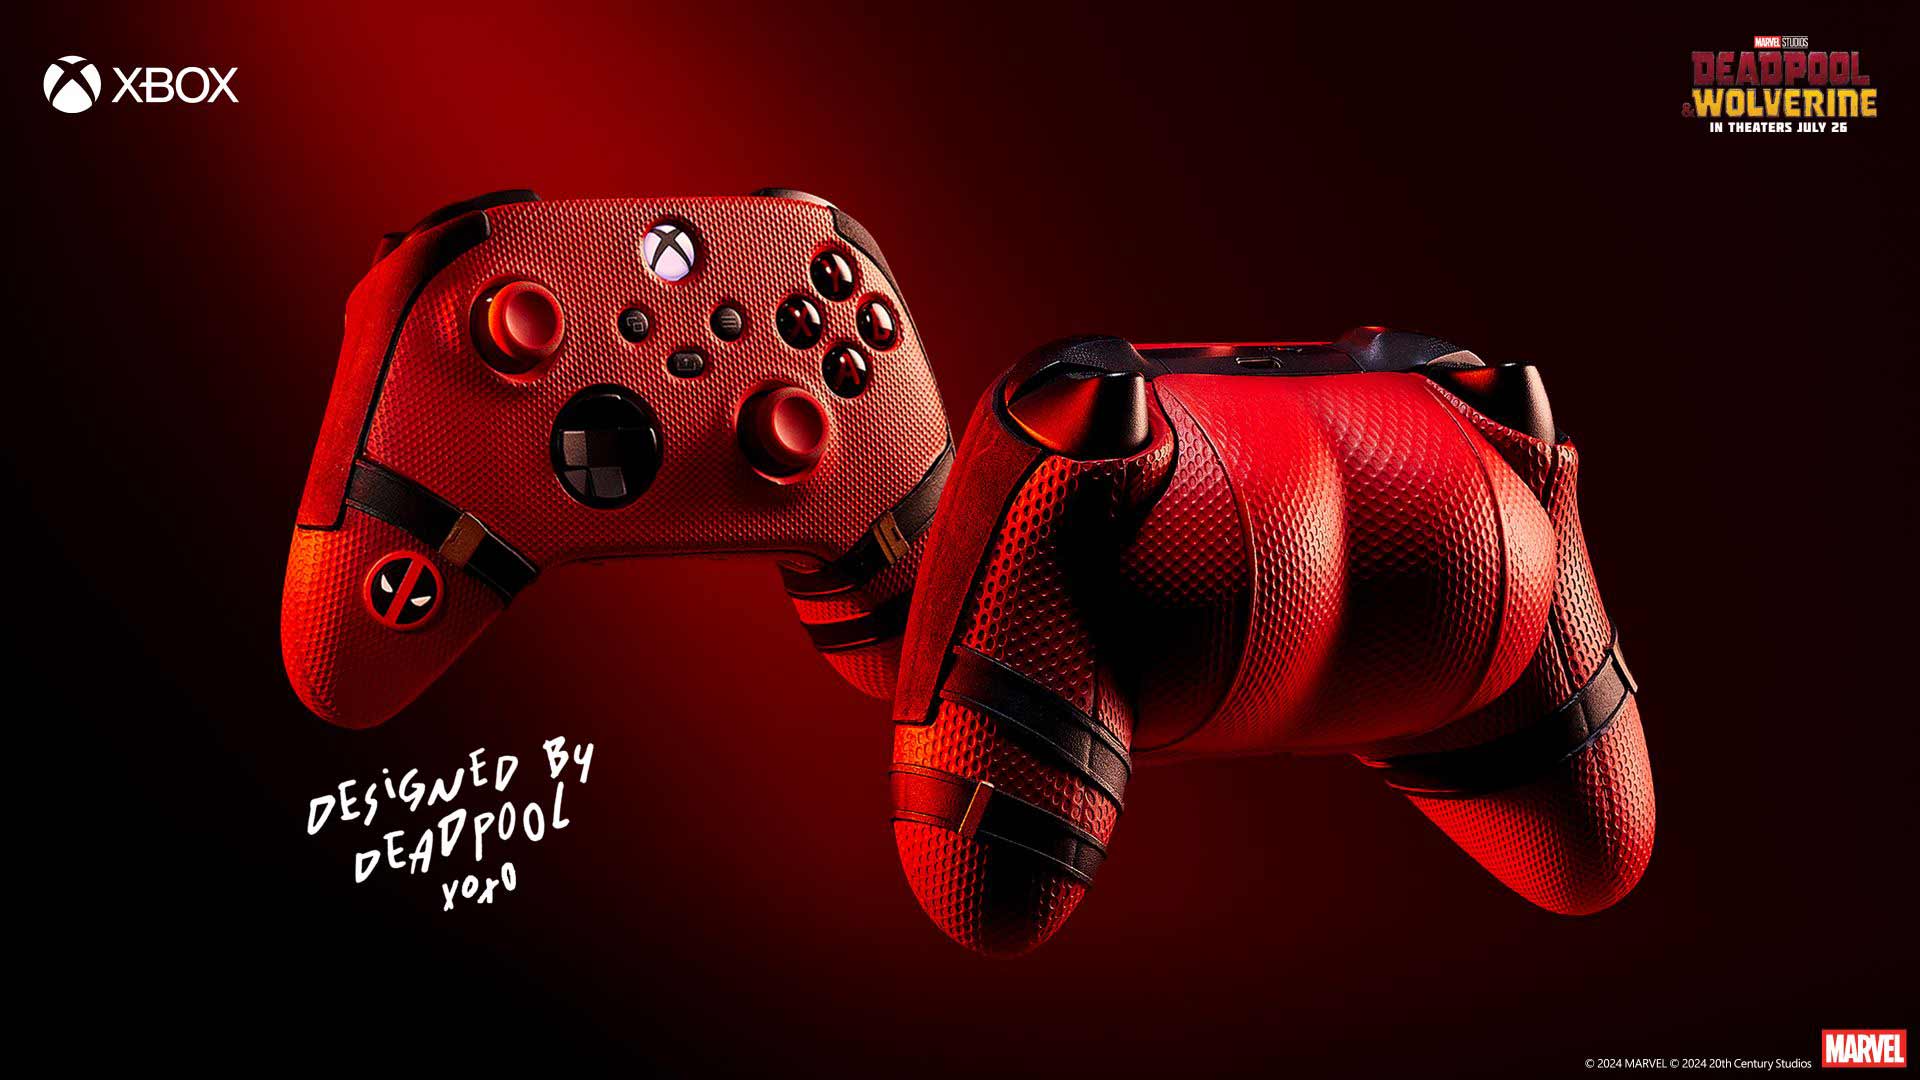 Enter for a chance to win this cheeky controller designed by Deadpool